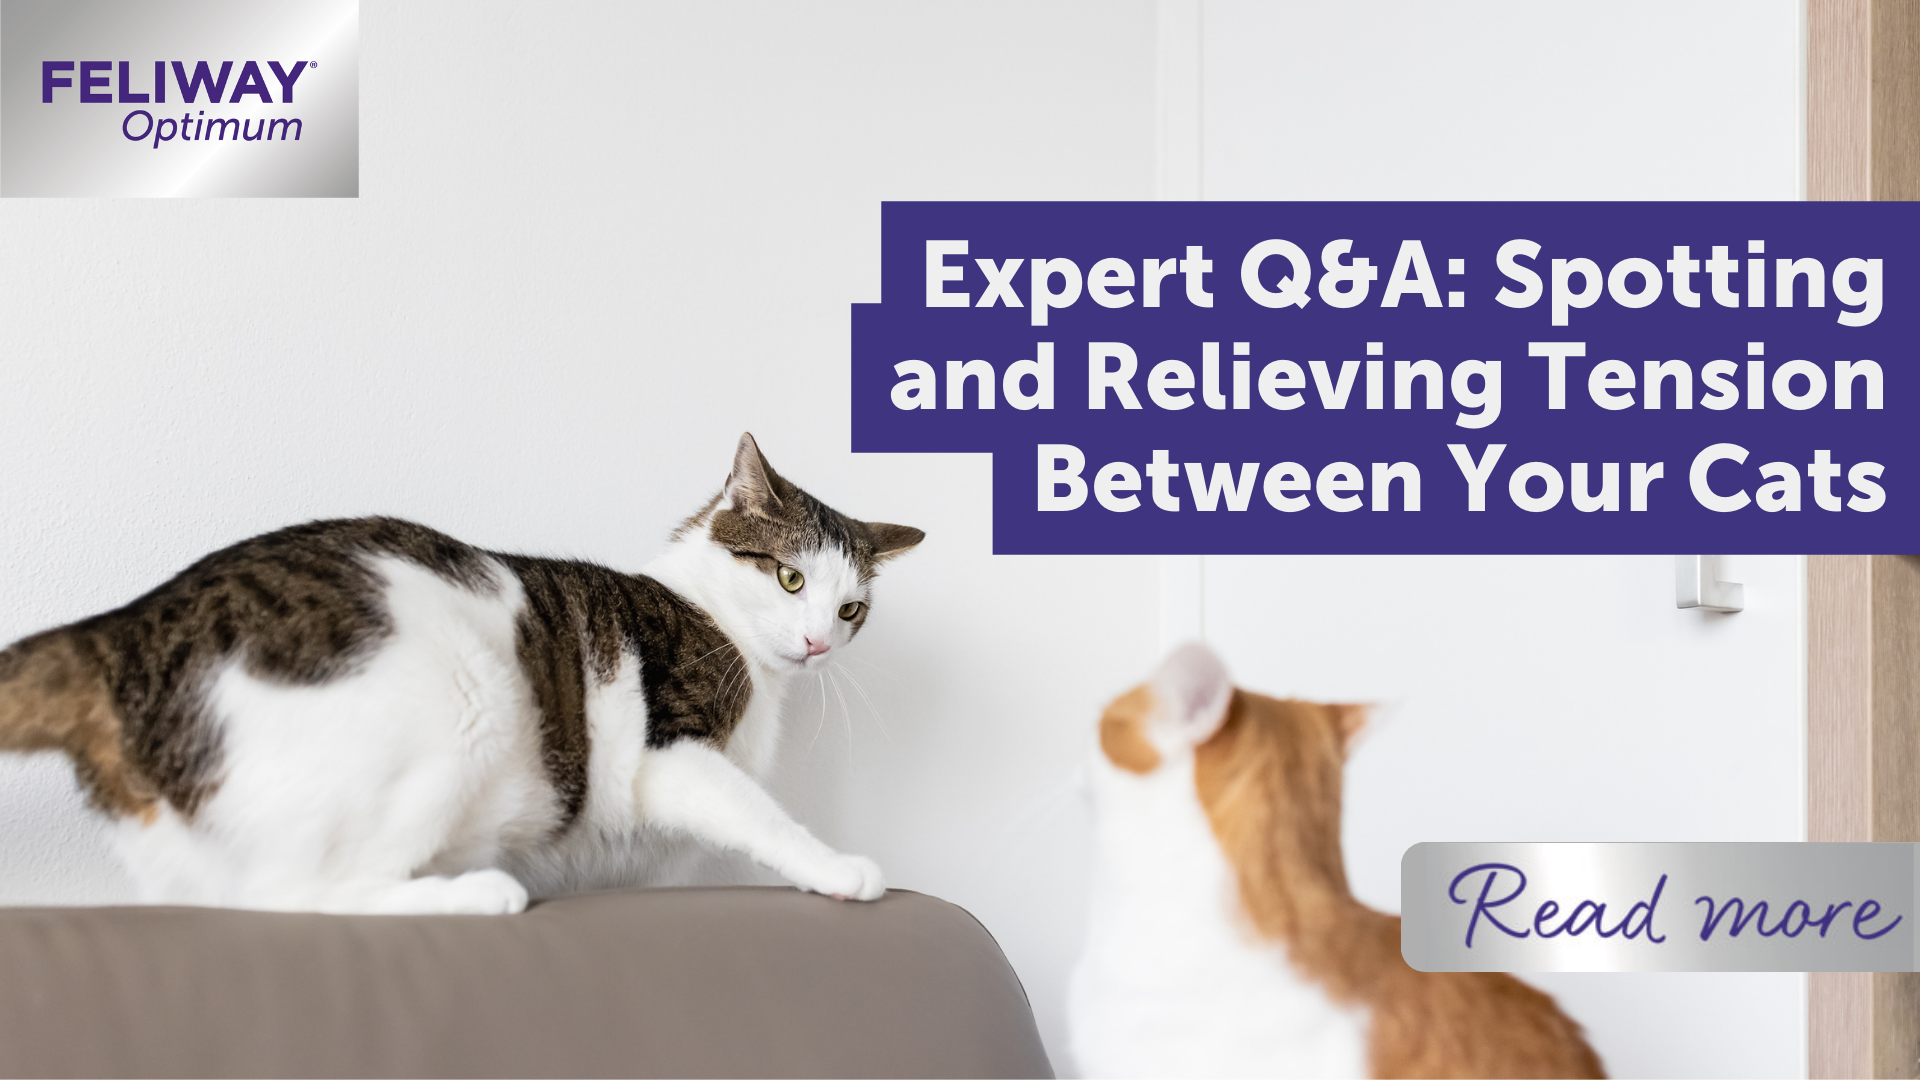 Expert Q&A: Spotting and relieving tension between your cats